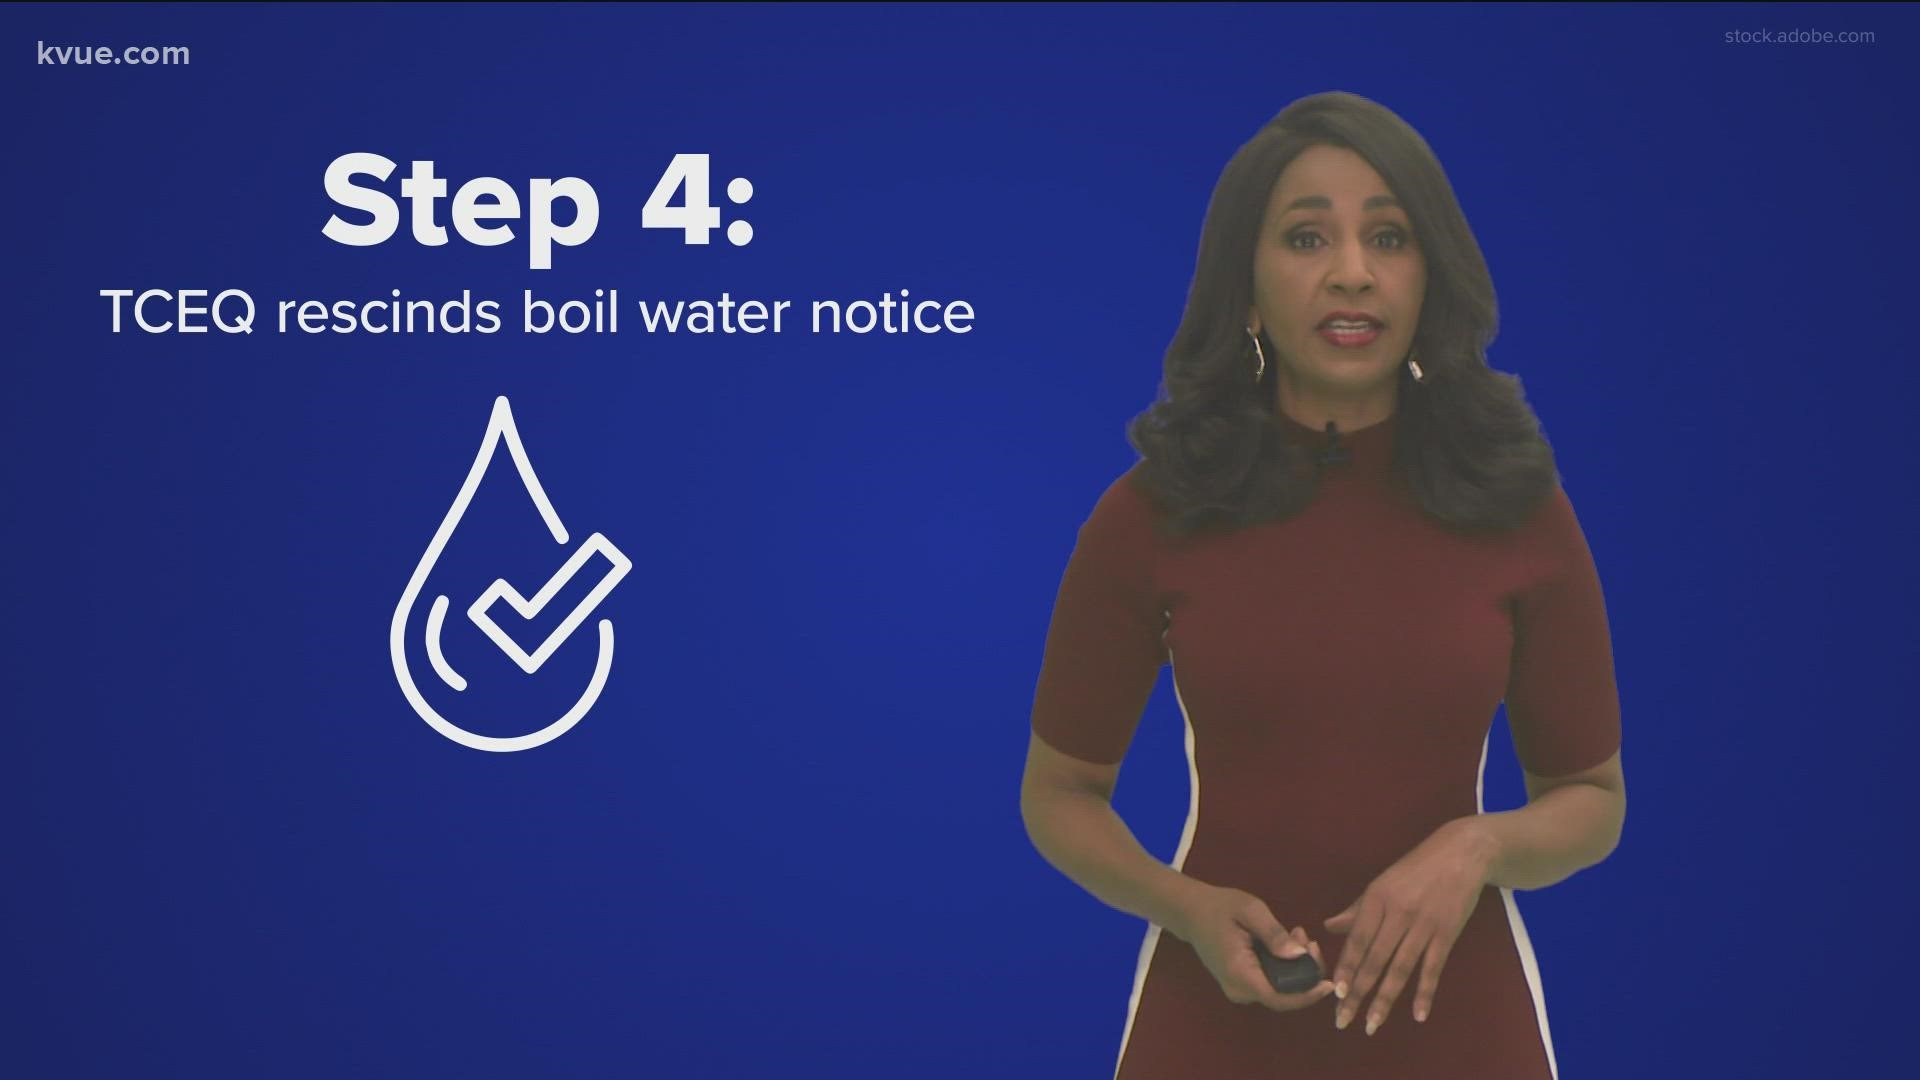 Austin Water has outlined five steps that need to happen before the boil water notice is lifted.